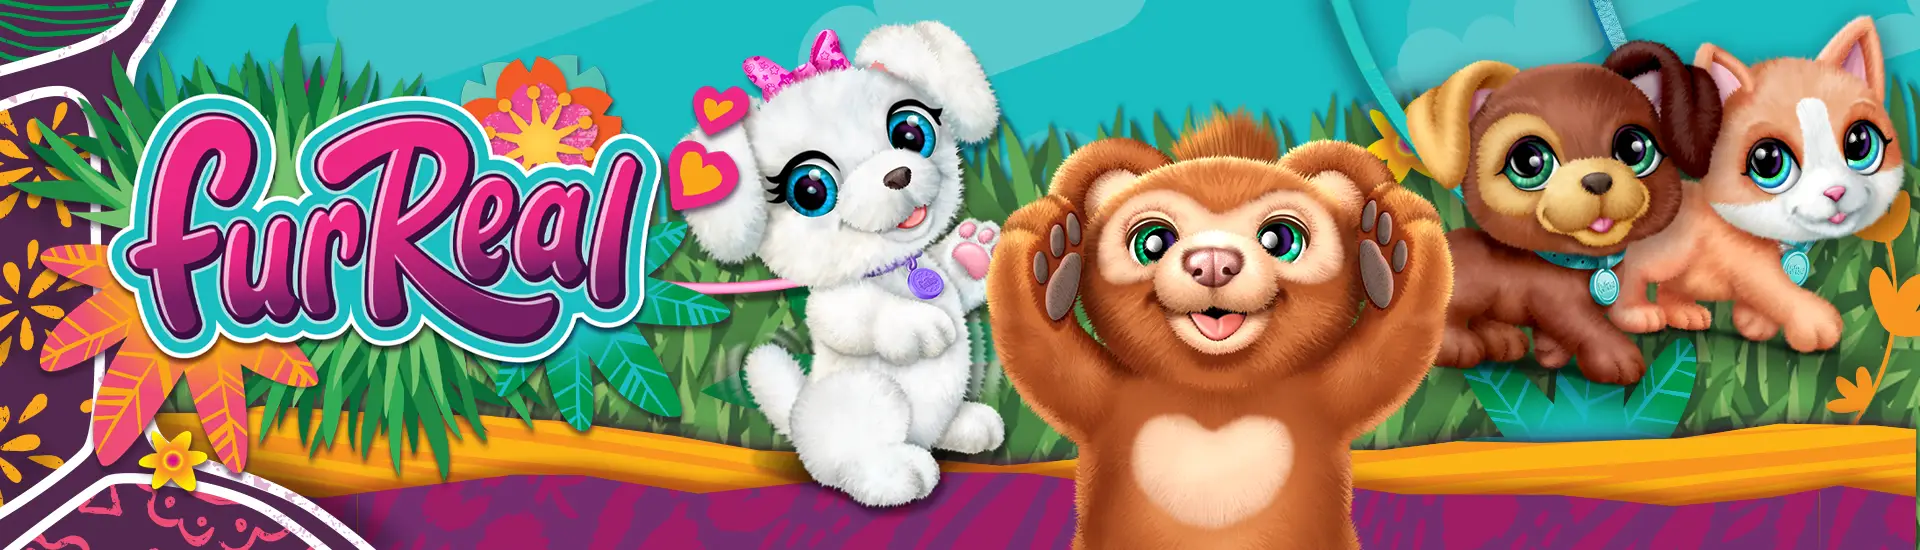 Furreal Friends - Cubby l'ours curieux - peluche interactive